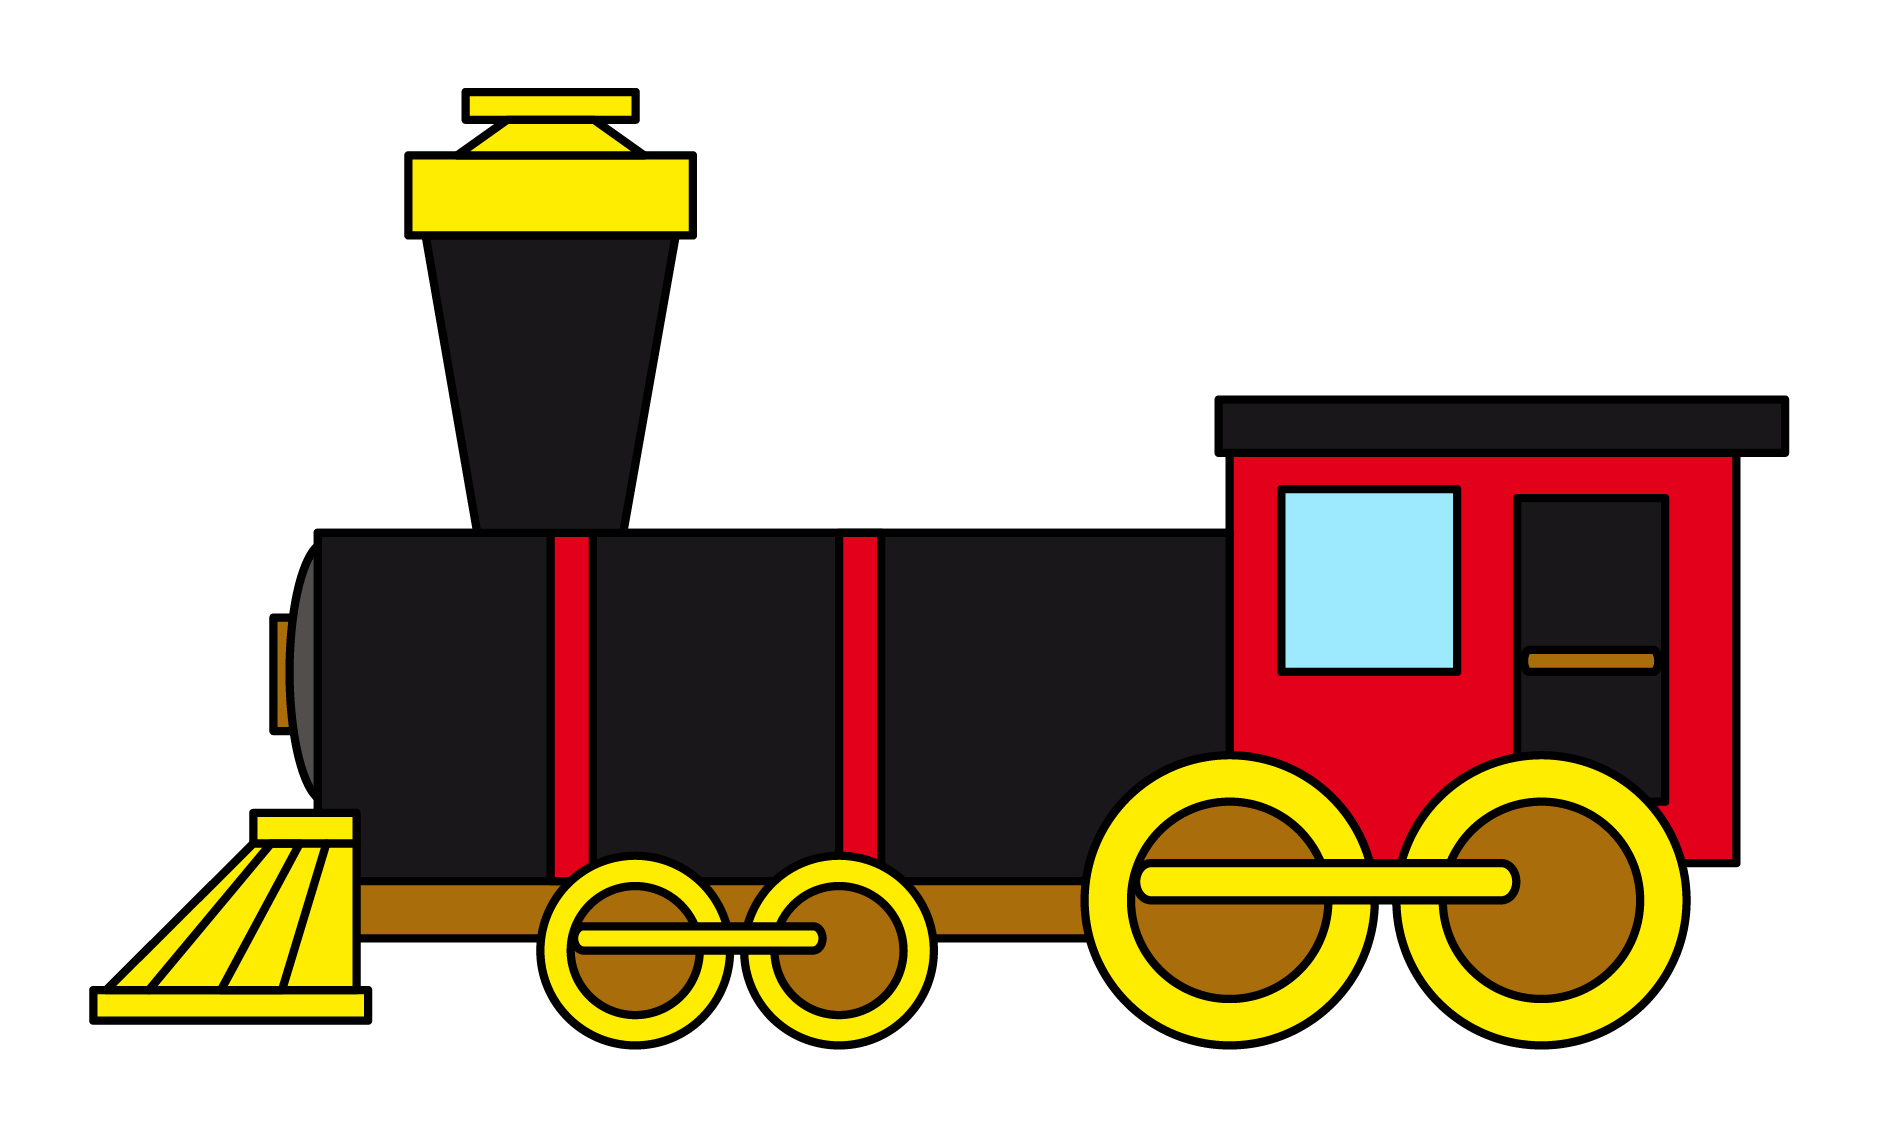 Clipart rocket train. Free to use public